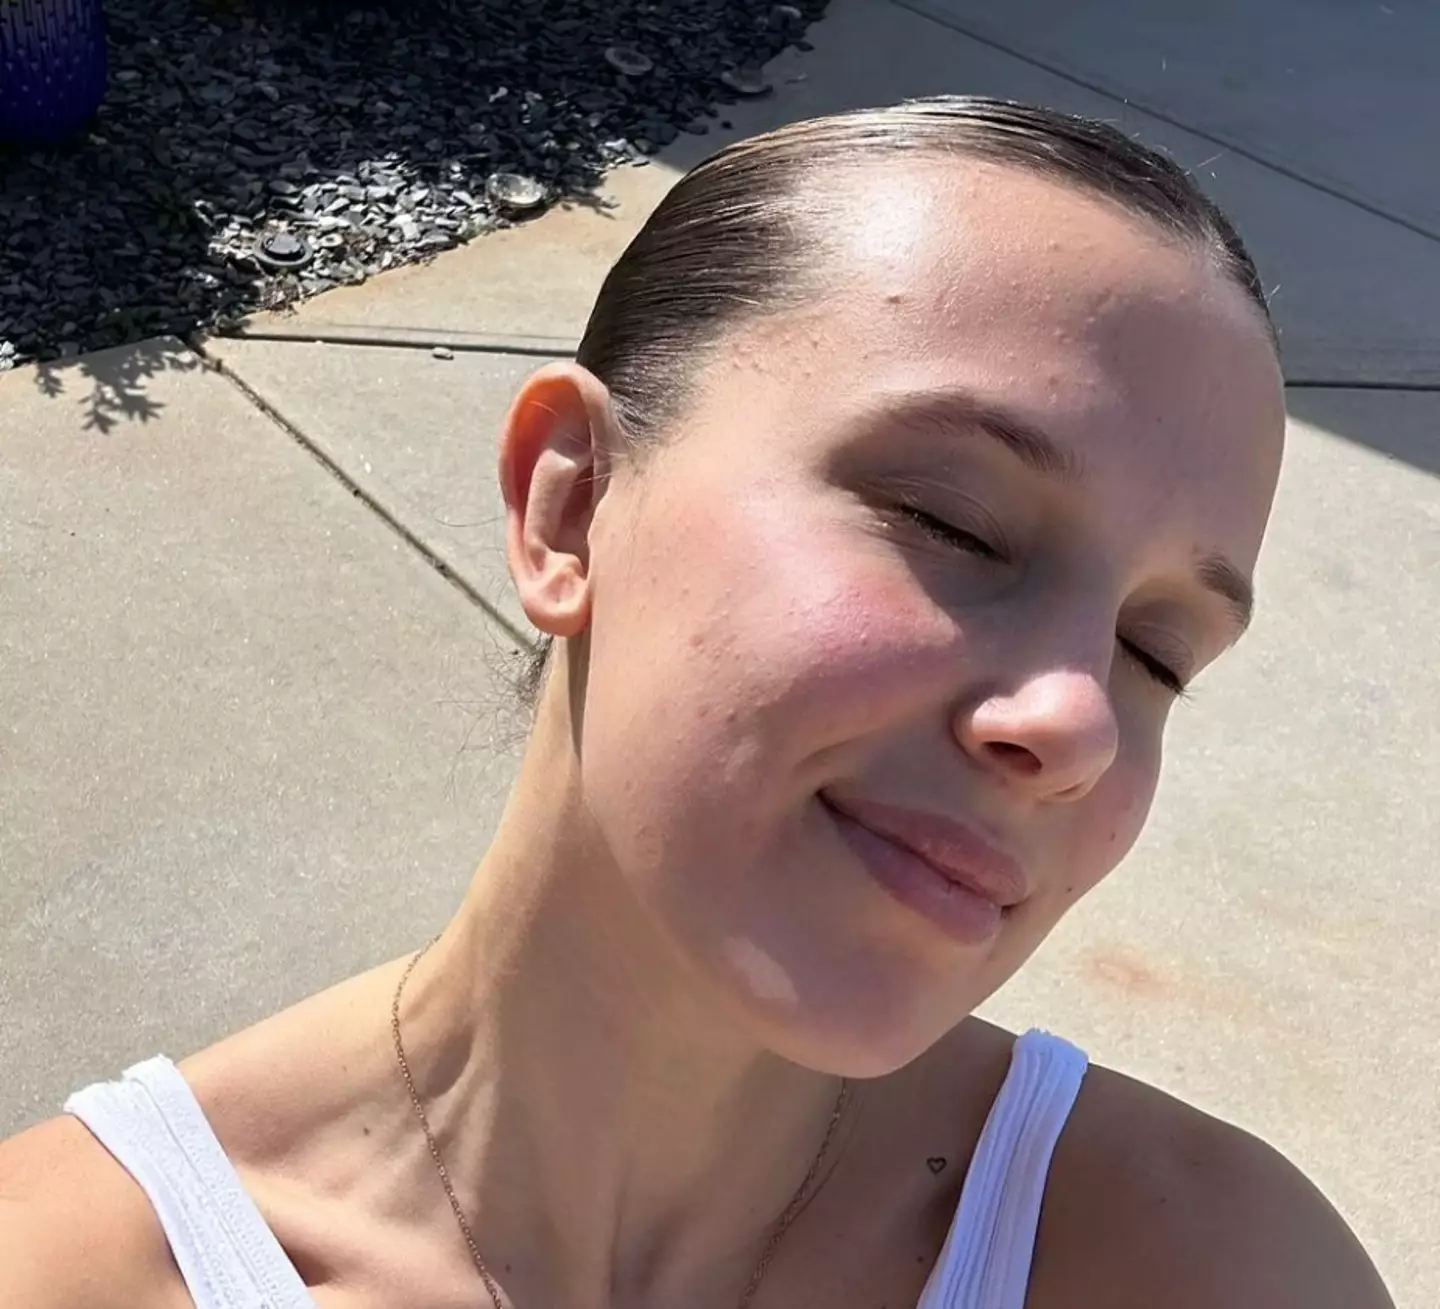 The star described the public attention as 'gross'. (Instagram/@milliebobbybrown)